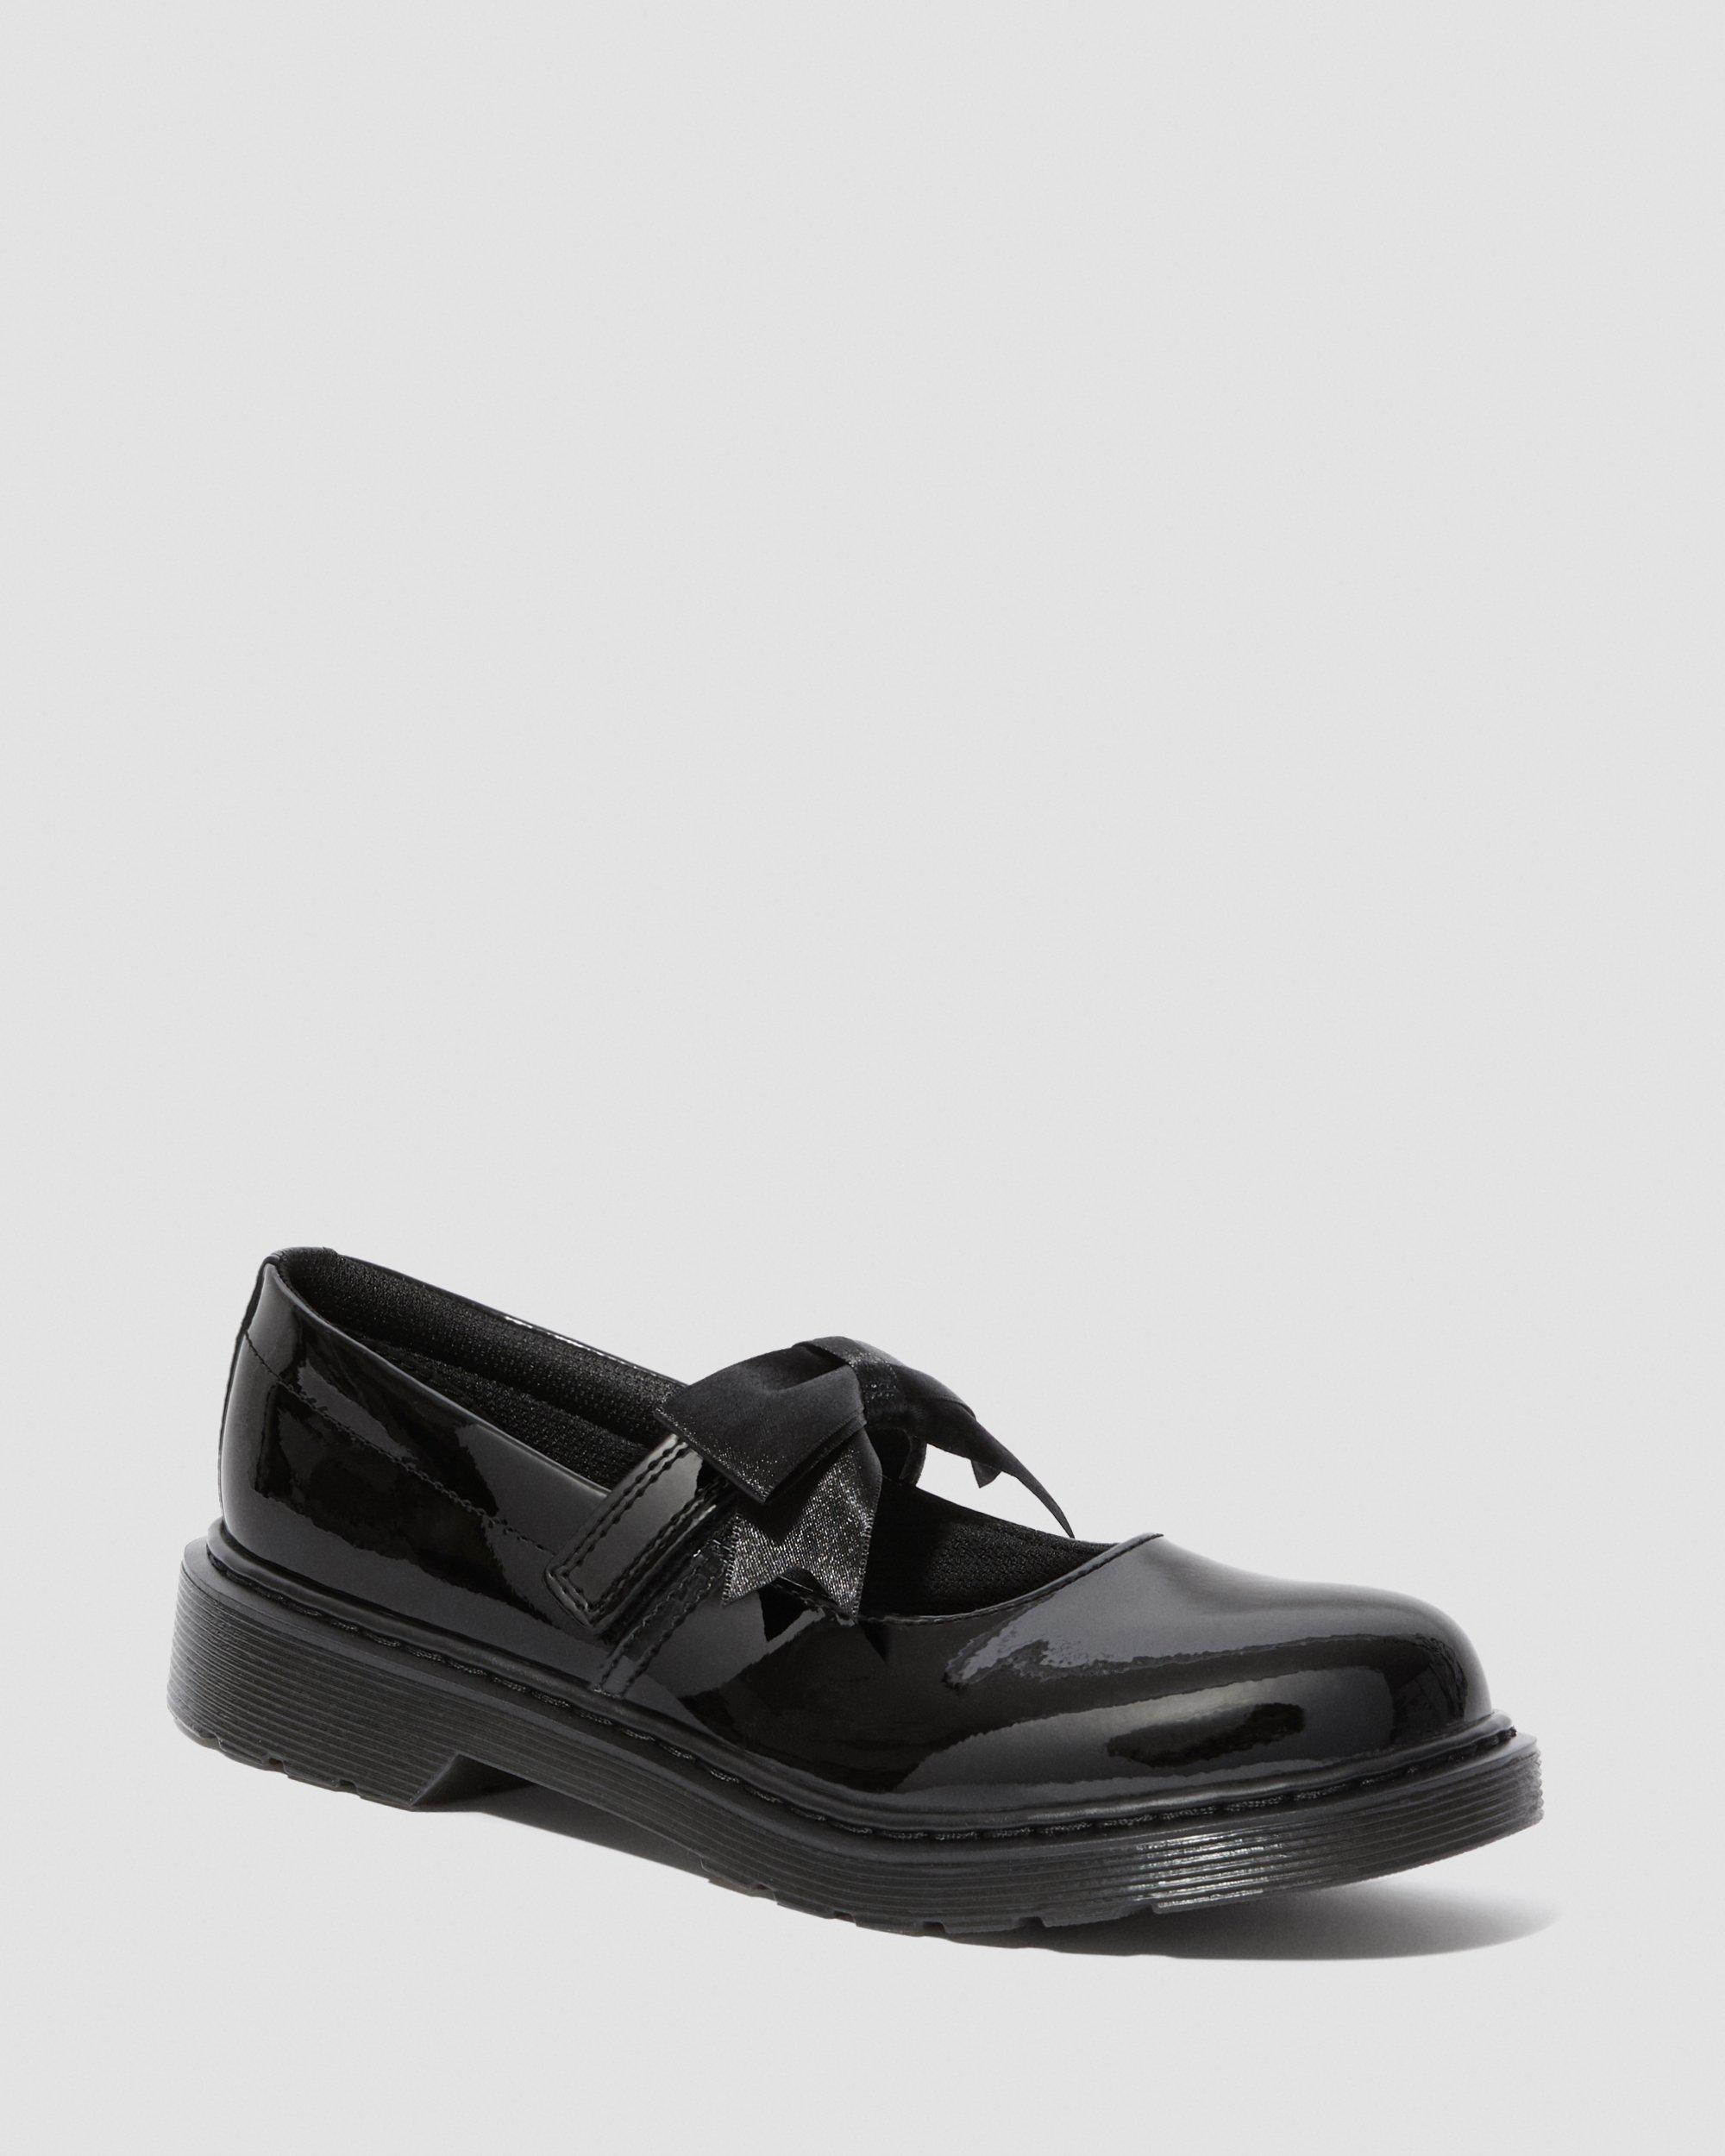 Youth Maccy II Patent Mary Jane Shoes in Black | Dr. Martens